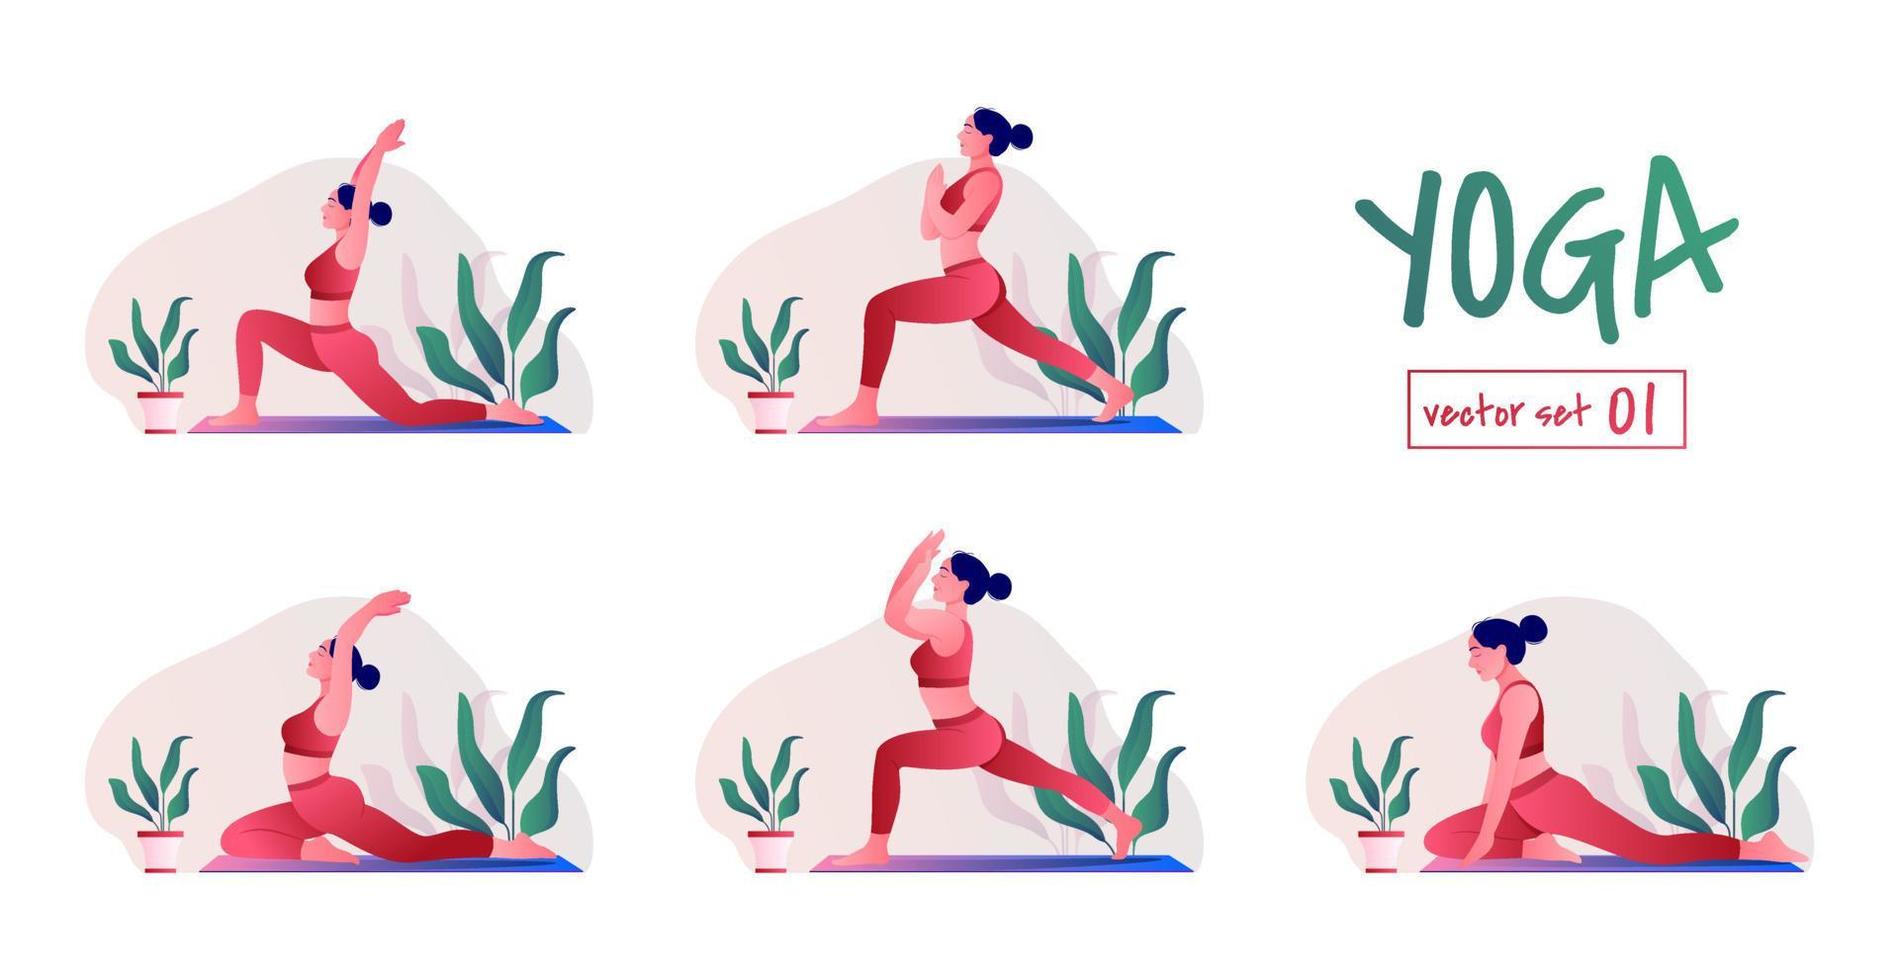 Yoga Workout Set. Young woman practicing Yoga poses. Woman workout fitness, aerobic and exercises. vector